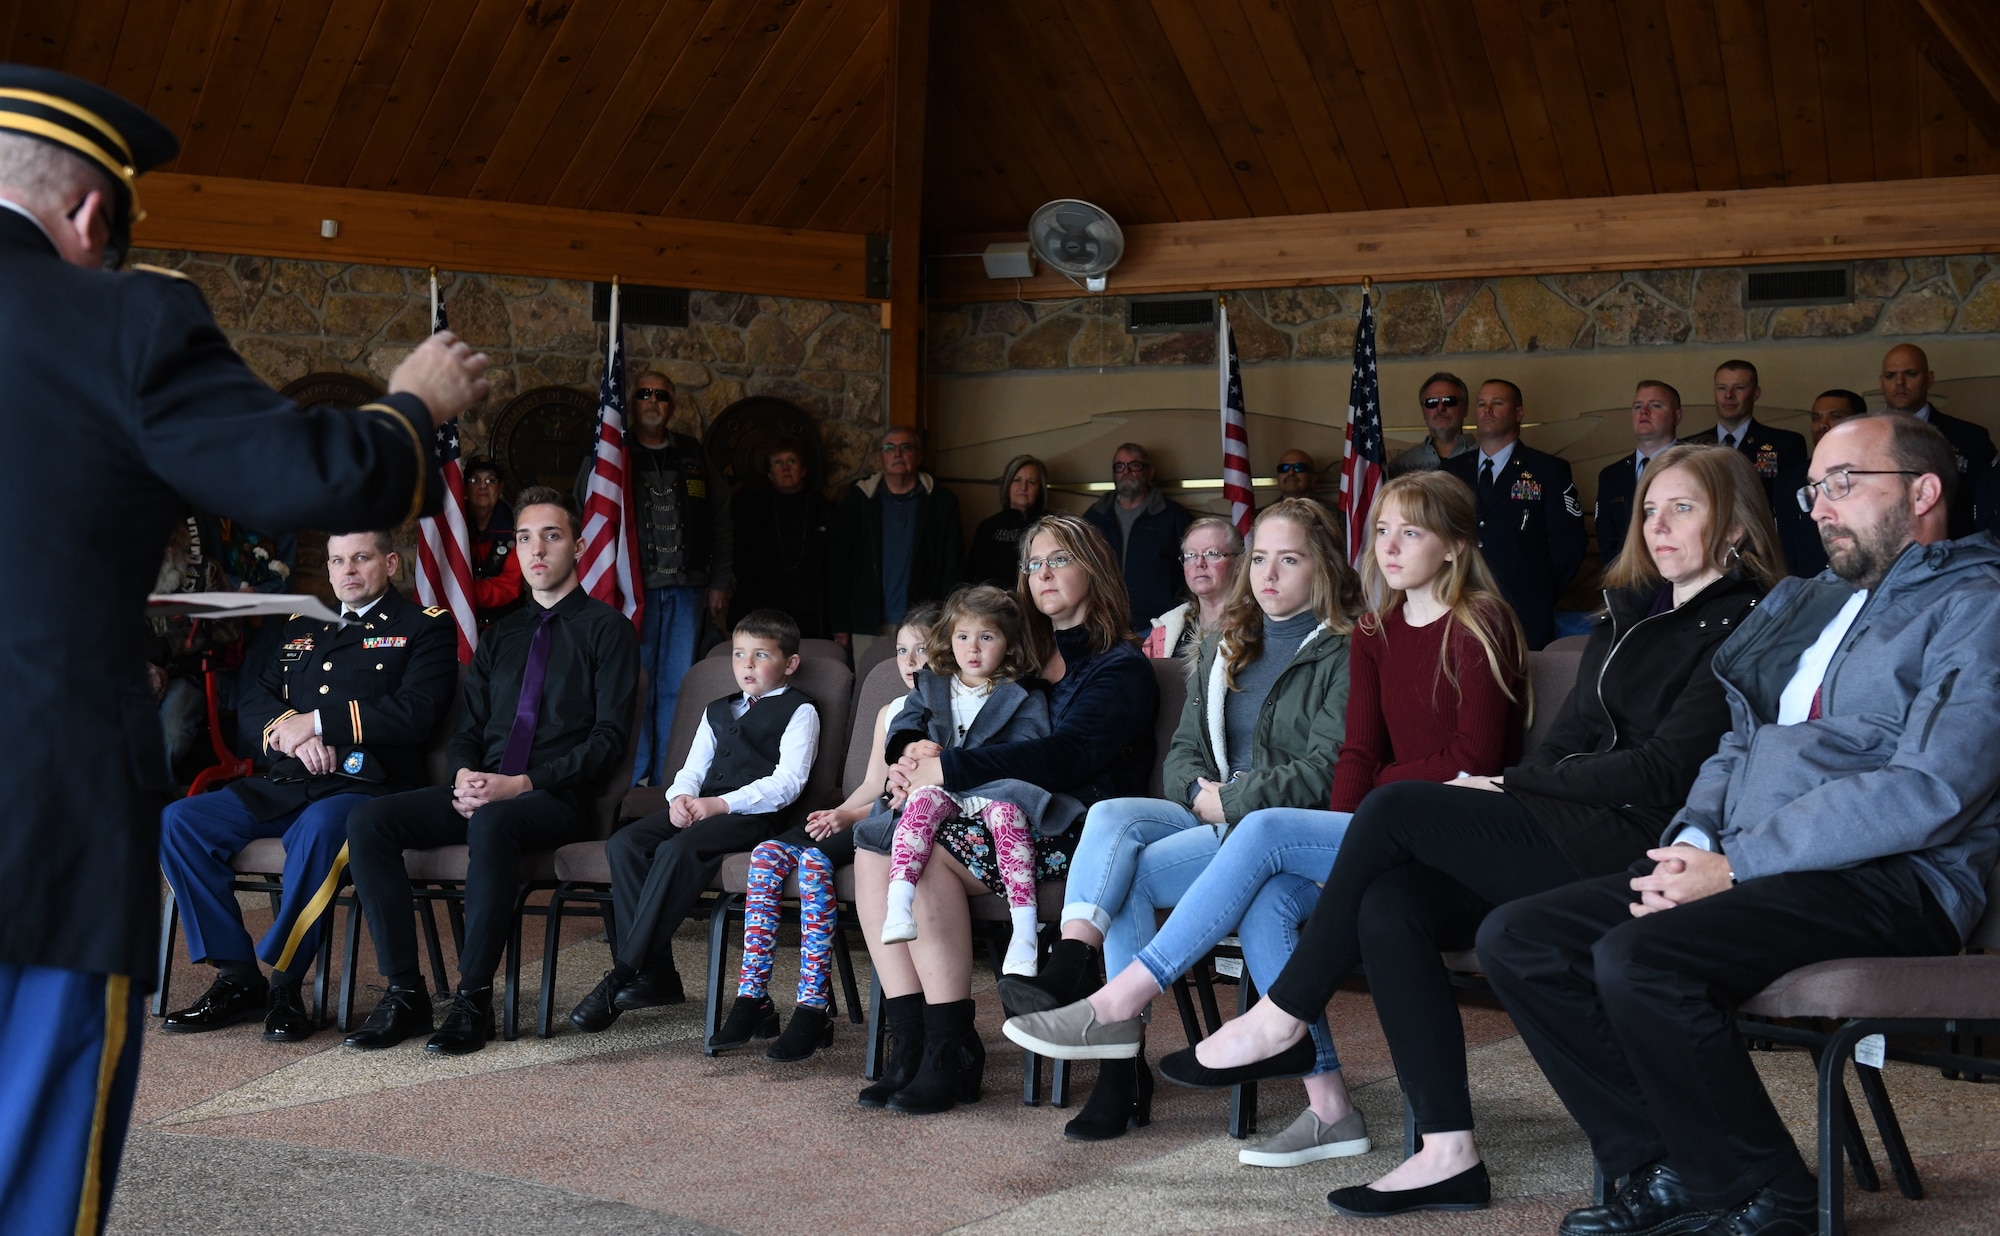 Family members attend a funeral service held in honor of former Pfc. Carroll E. Lonas before he is laid to rest at the Black Hills National cemetery in Sturgis, S.D., May 9, 2019. Lonas, 94, had served as rifleman with the U.S. Army National Guard’s 45th Infantry Division during World War II. Lonas was detained by the Germans for 14 months until he successfully escaped to friendly territory. (U.S. Air Force photo by Airman 1st Class Christina Bennett)